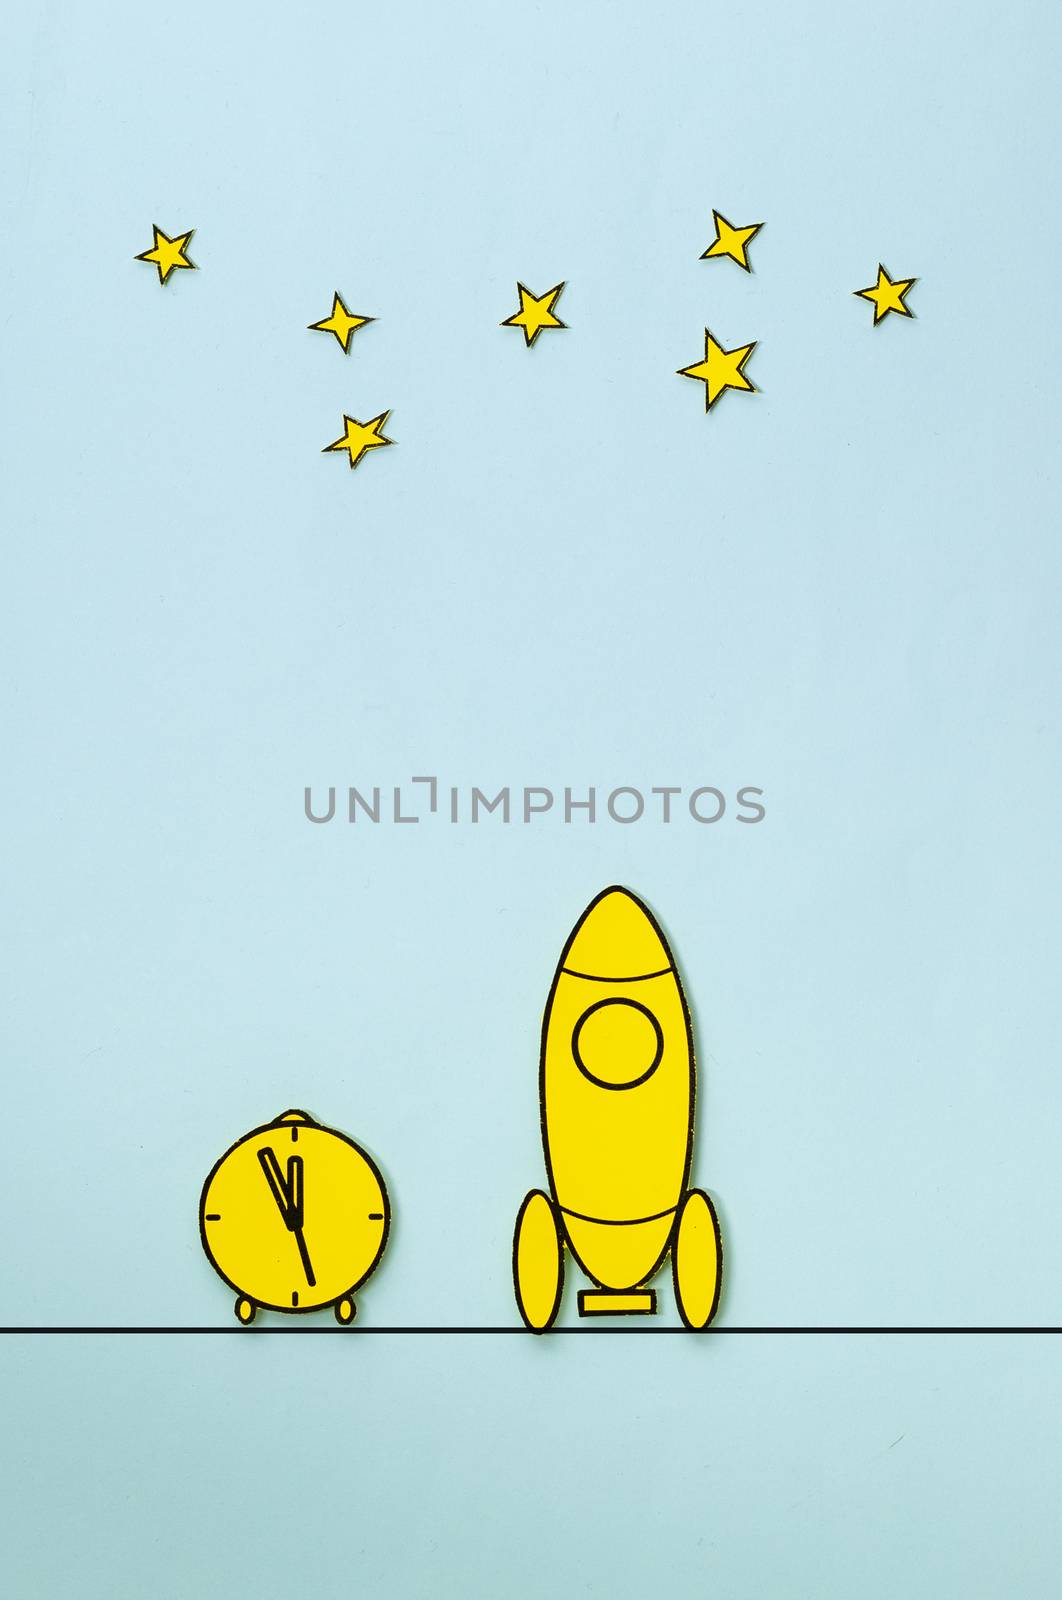 Countdown to the launch of a yellow rocket by sergii_gnatiuk